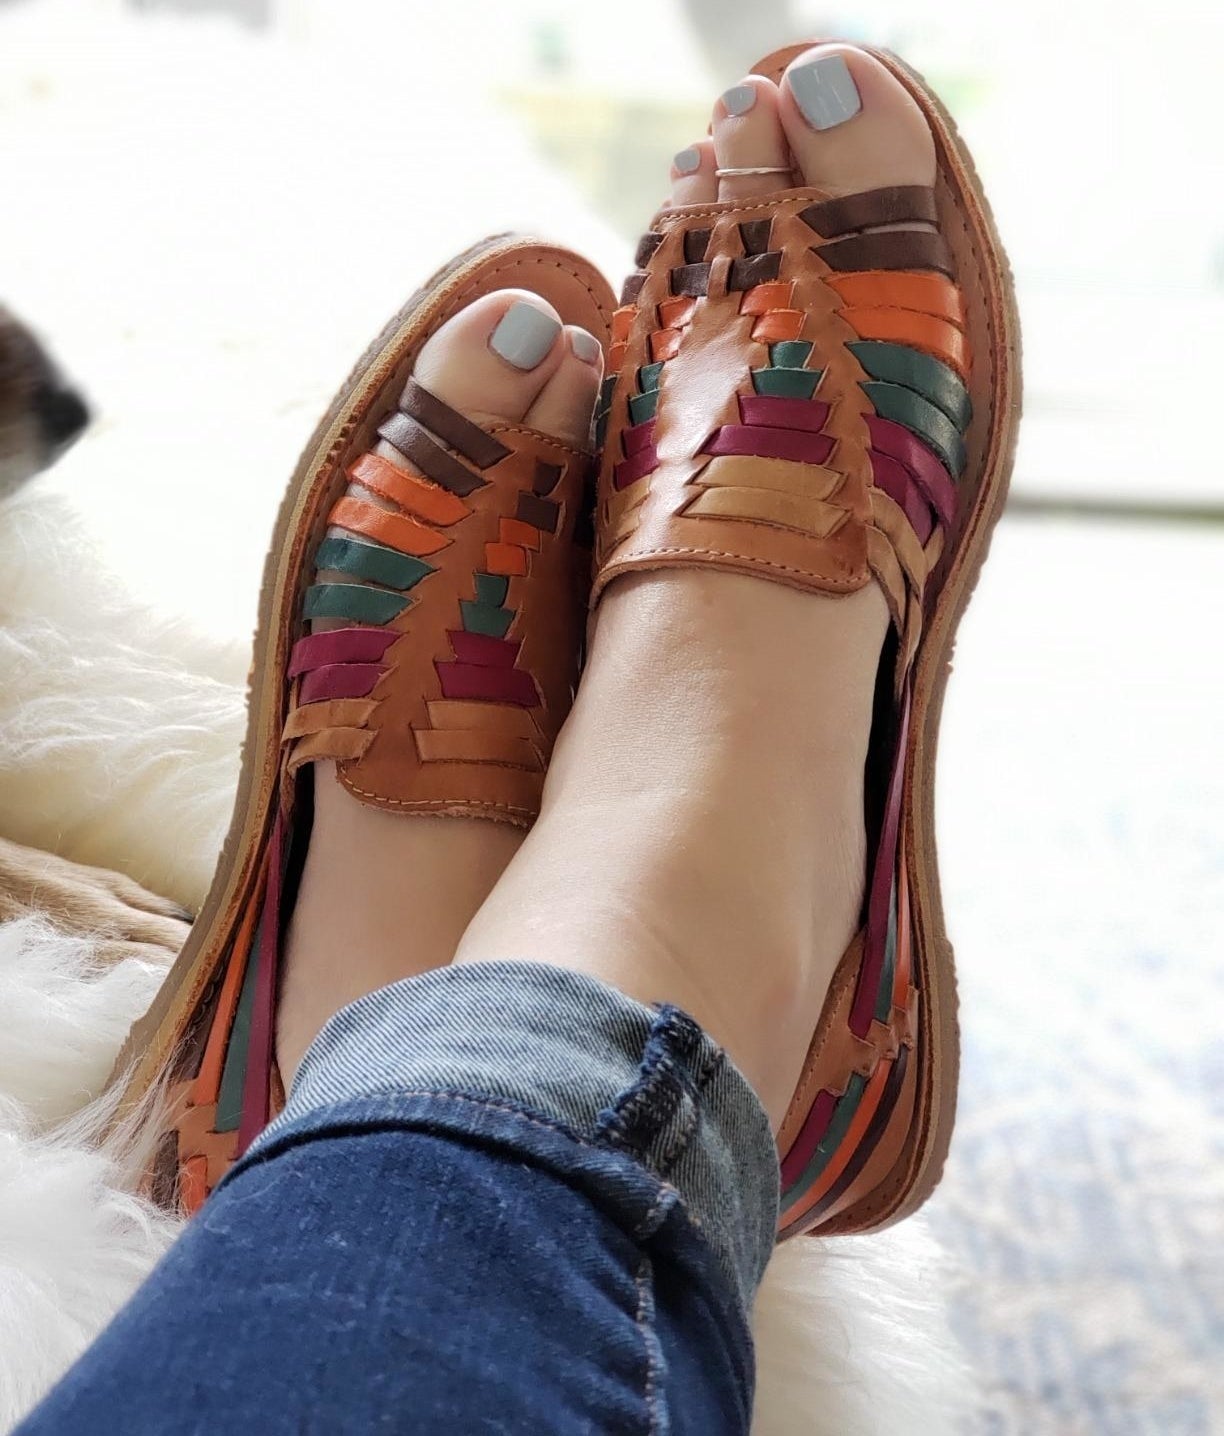 reviewer photo of colorful, open-toed huarache sandals